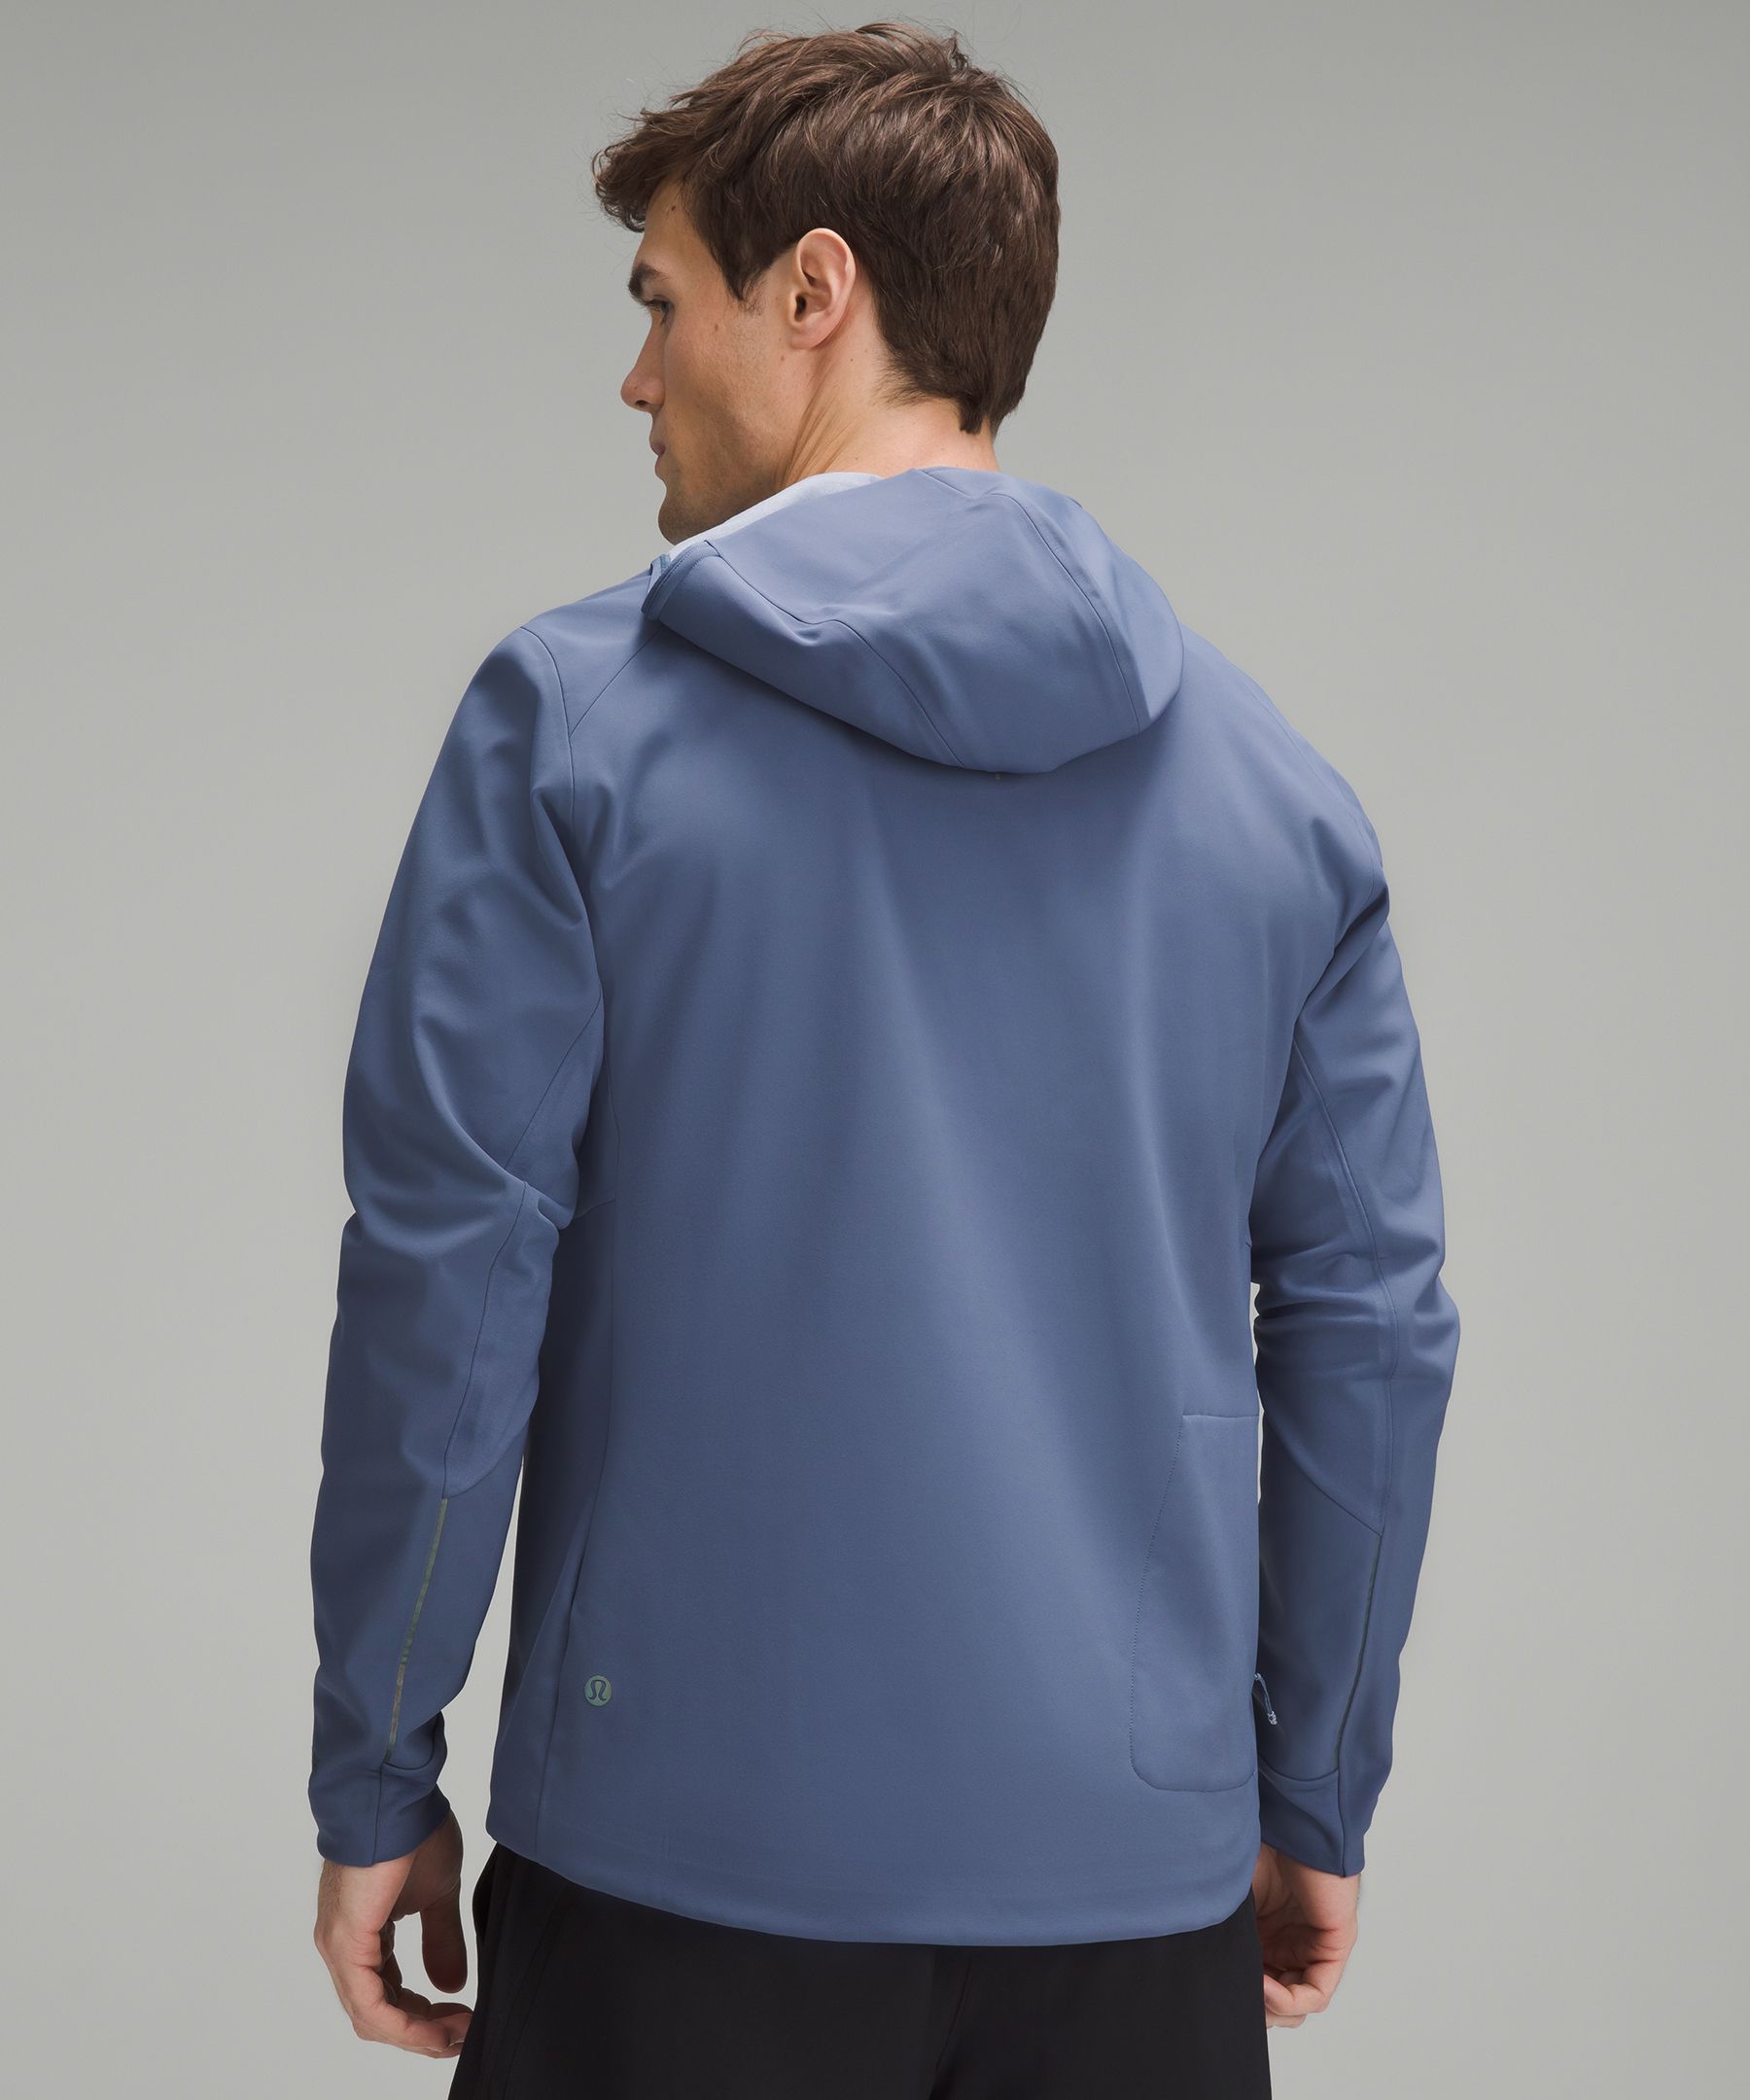 lululemon - The only layer you'll need to ace your cold and wet weather  runs. The sleek and technical Cross Chill Jacket will keep you warm to your  core from mile one